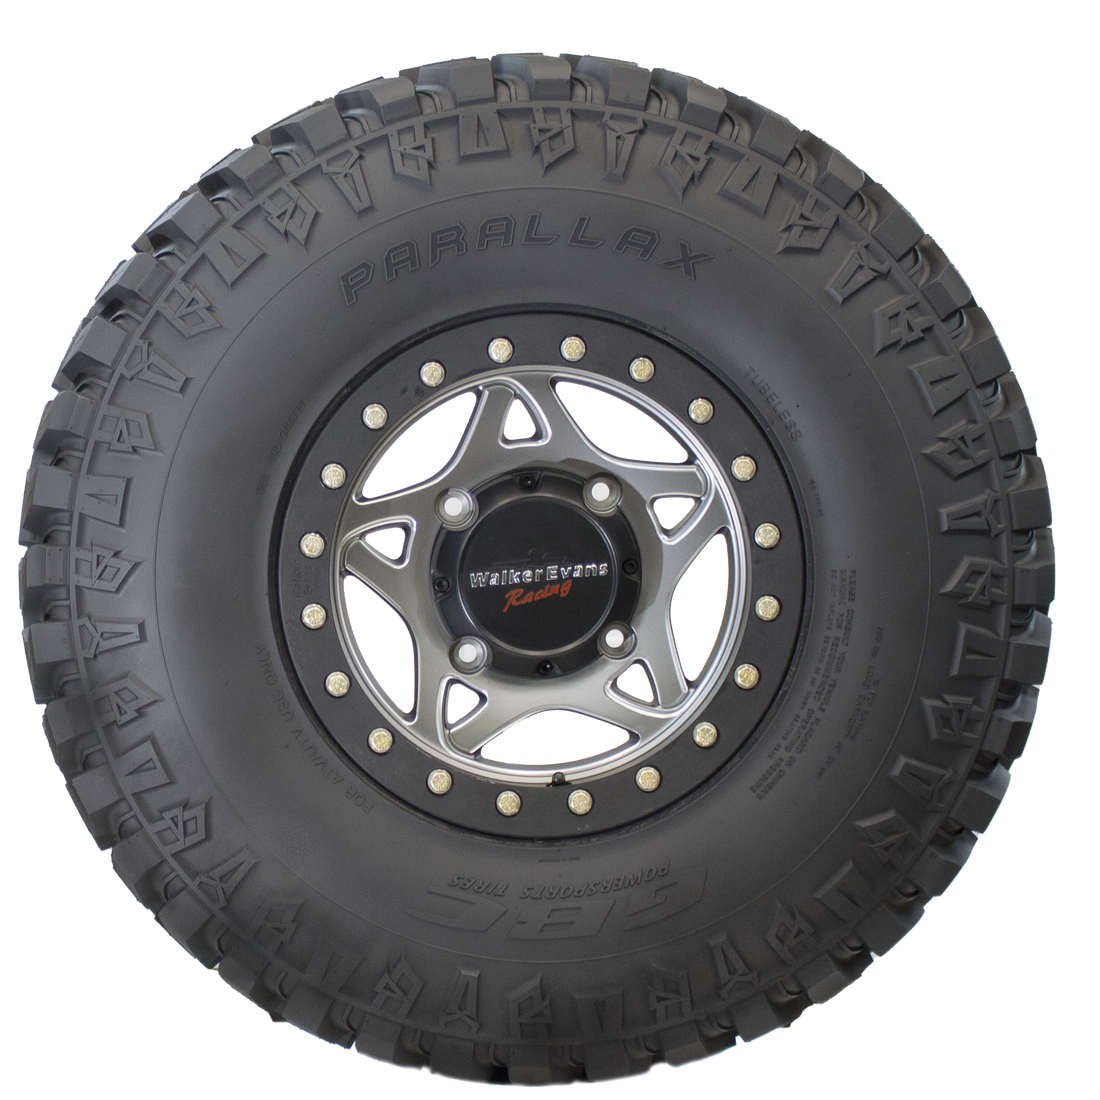 Side view of the Parallax UTV tire, showcasing broad shoulder blocks that ensure maximum traction and continuous ground contact for enhanced stability. The image also features an extended sidewall lug design for increased cornering traction and protection against sidewall punctures and other potential damage.